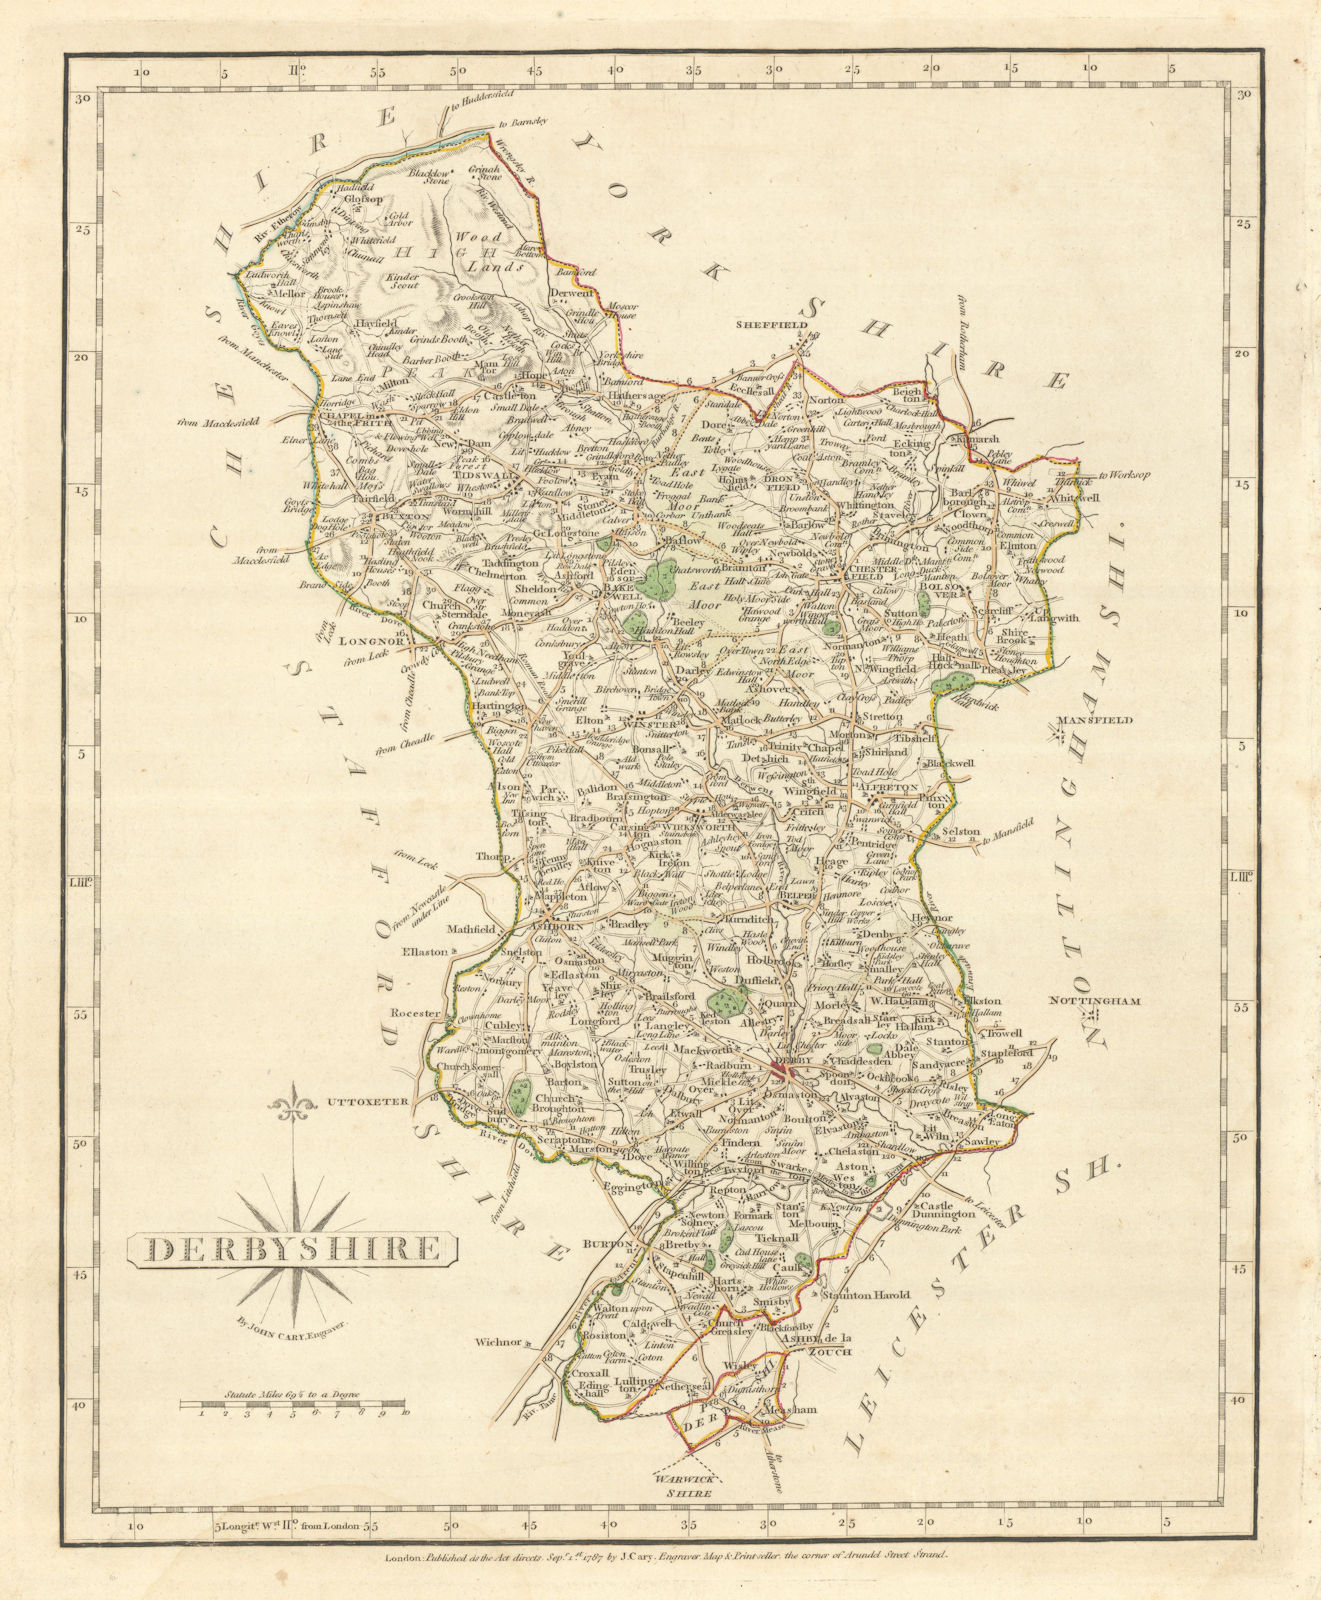 Antique county map of DERBYSHIRE  by JOHN CARY. Original outline colour 1793